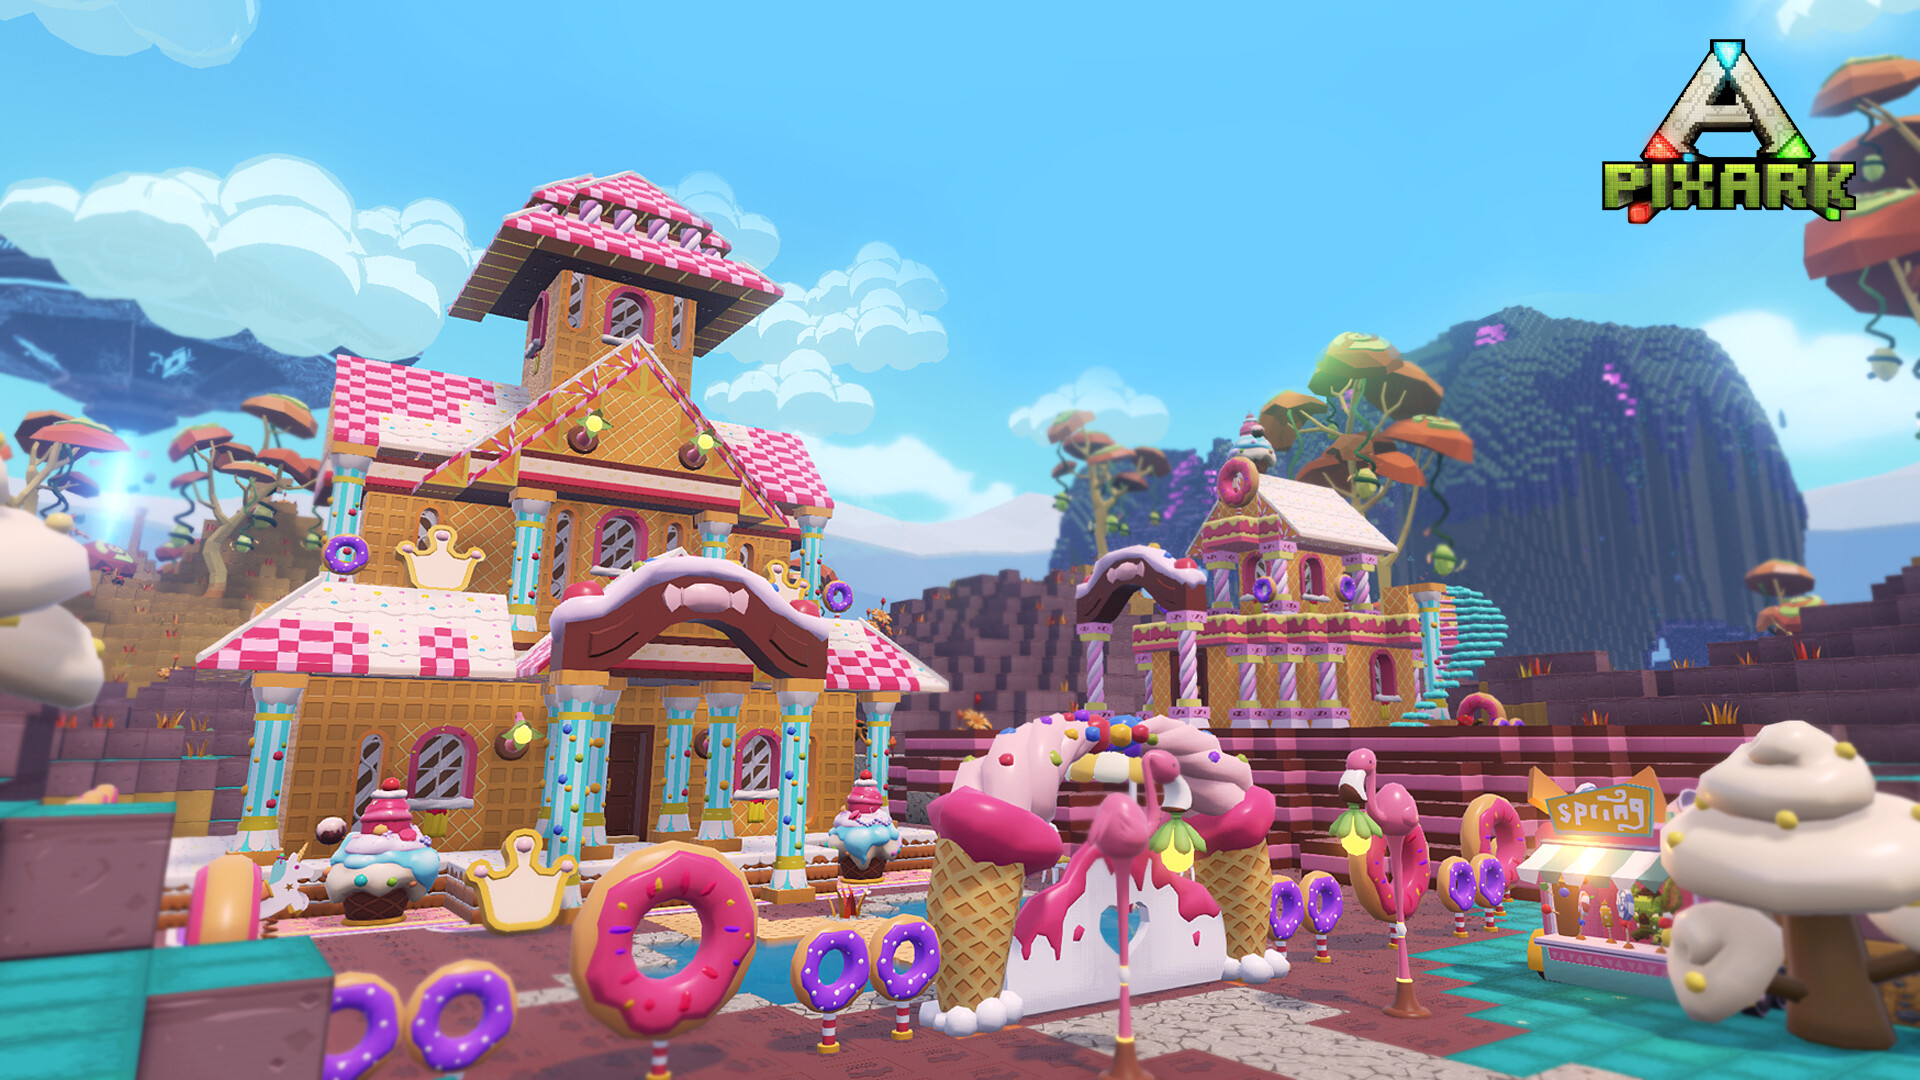 PixARK - A Sweet Pack for the Sweetest Featured Screenshot #1